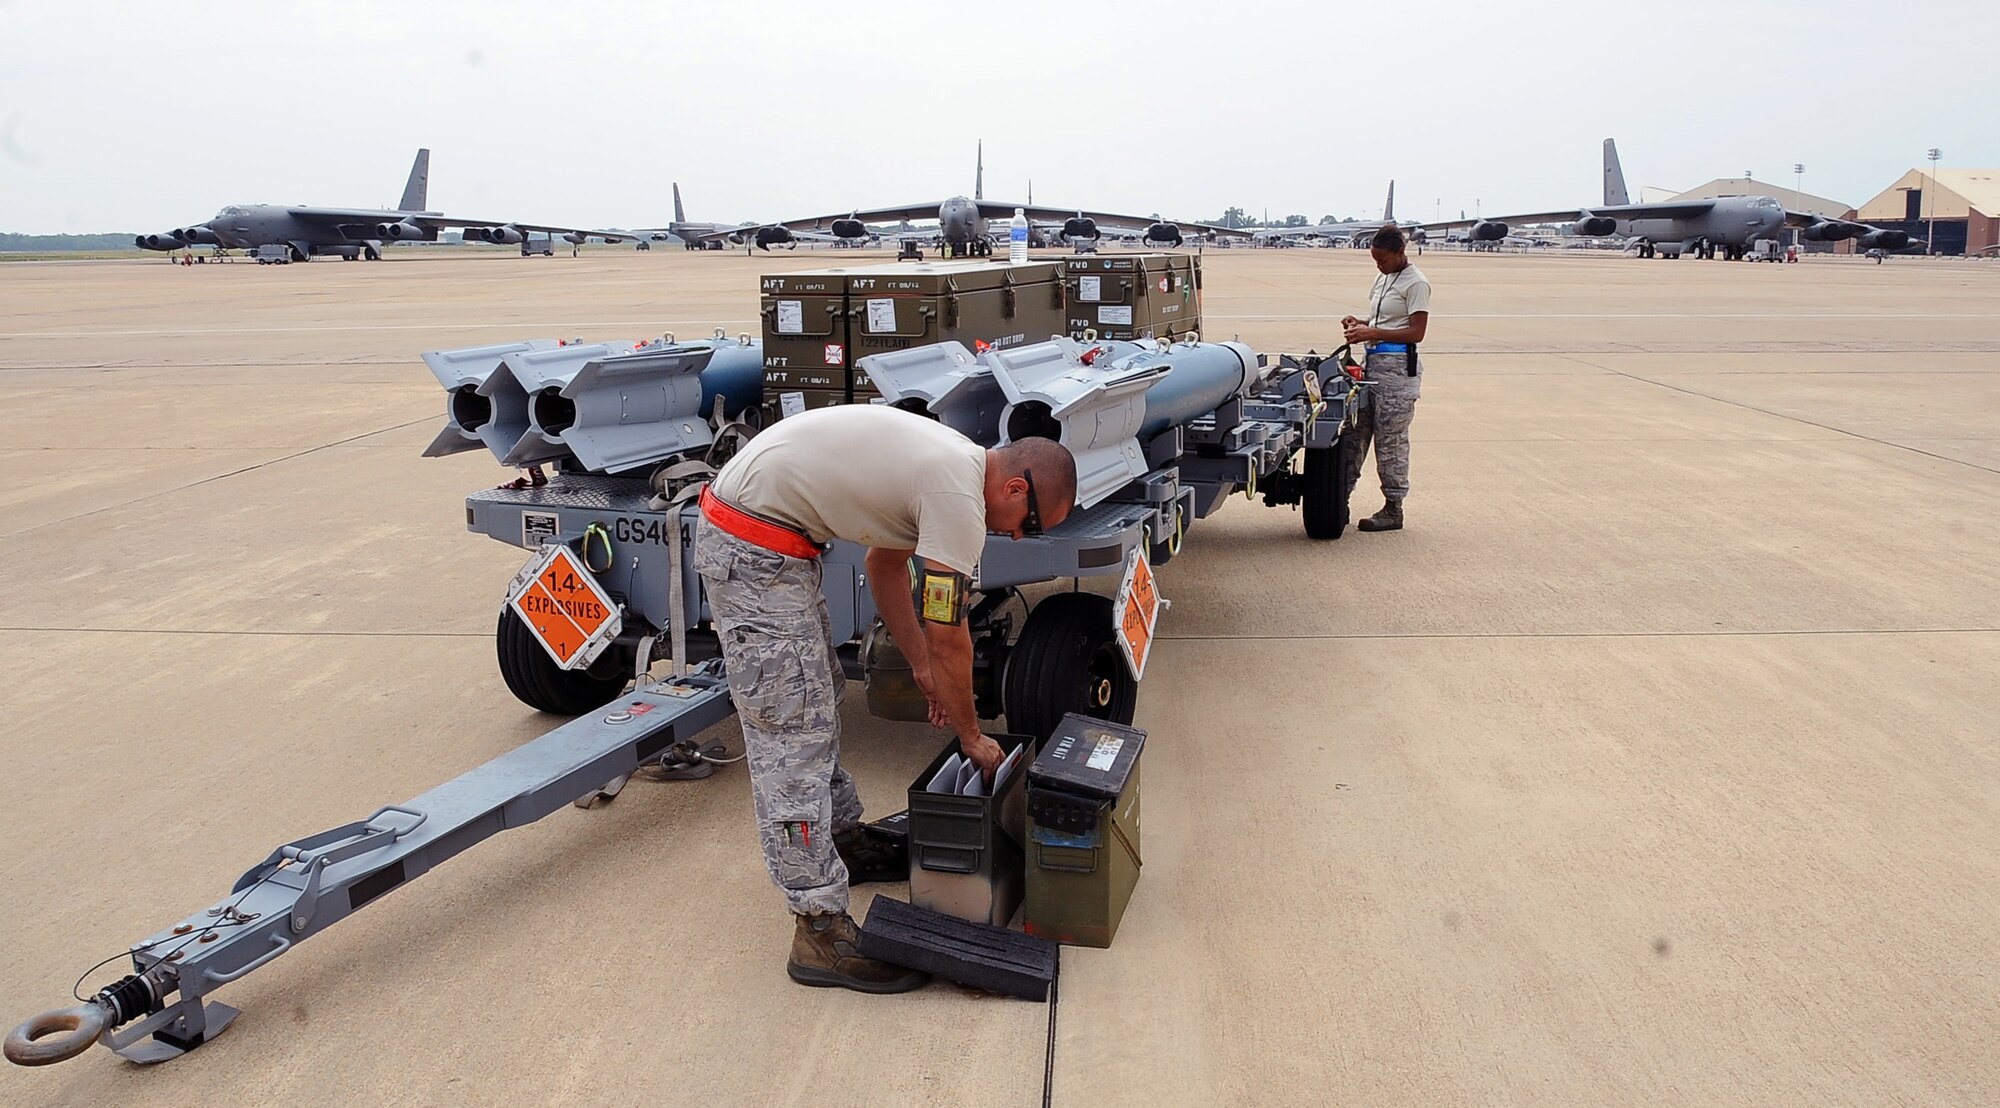 Weapons loaders from the 2nd Maintenance Operations Squadron prepare munitions for loading on Barksdale Air Force Base, La., Aug. 15. The munitions were being loaded onto a B-52H Stratofortress to be dropped at a bombing range in Utah for Exercise Combat Hammer. The exercise evaluates the employment of precision guided munitions to ensure the weapons are fully functional and mission capable. (U.S. Air Force photo/Staff Sgt. Amber Ashcraft)(RELEASED)
